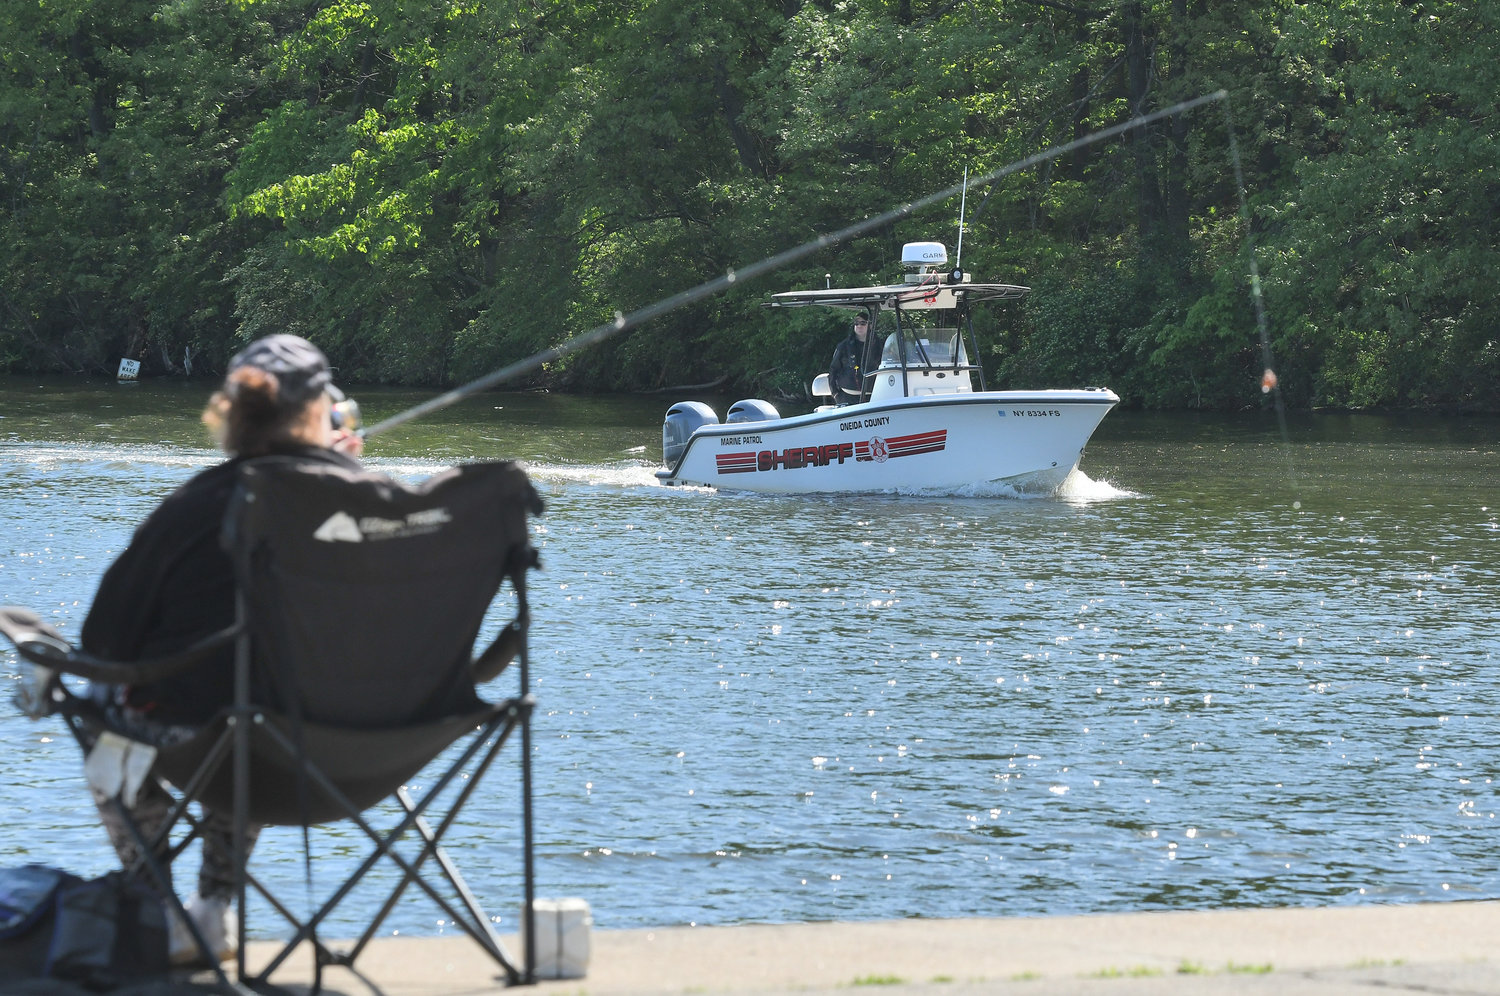 Sheriff’s Sgt. Scott Kahl, supervisor of the Marine Patrol, takes one of the unit’s boats on a trip through the canal at Sylvan Beach Tuesday morning. The warm weather has already begun to bring out fishermen and boaters.